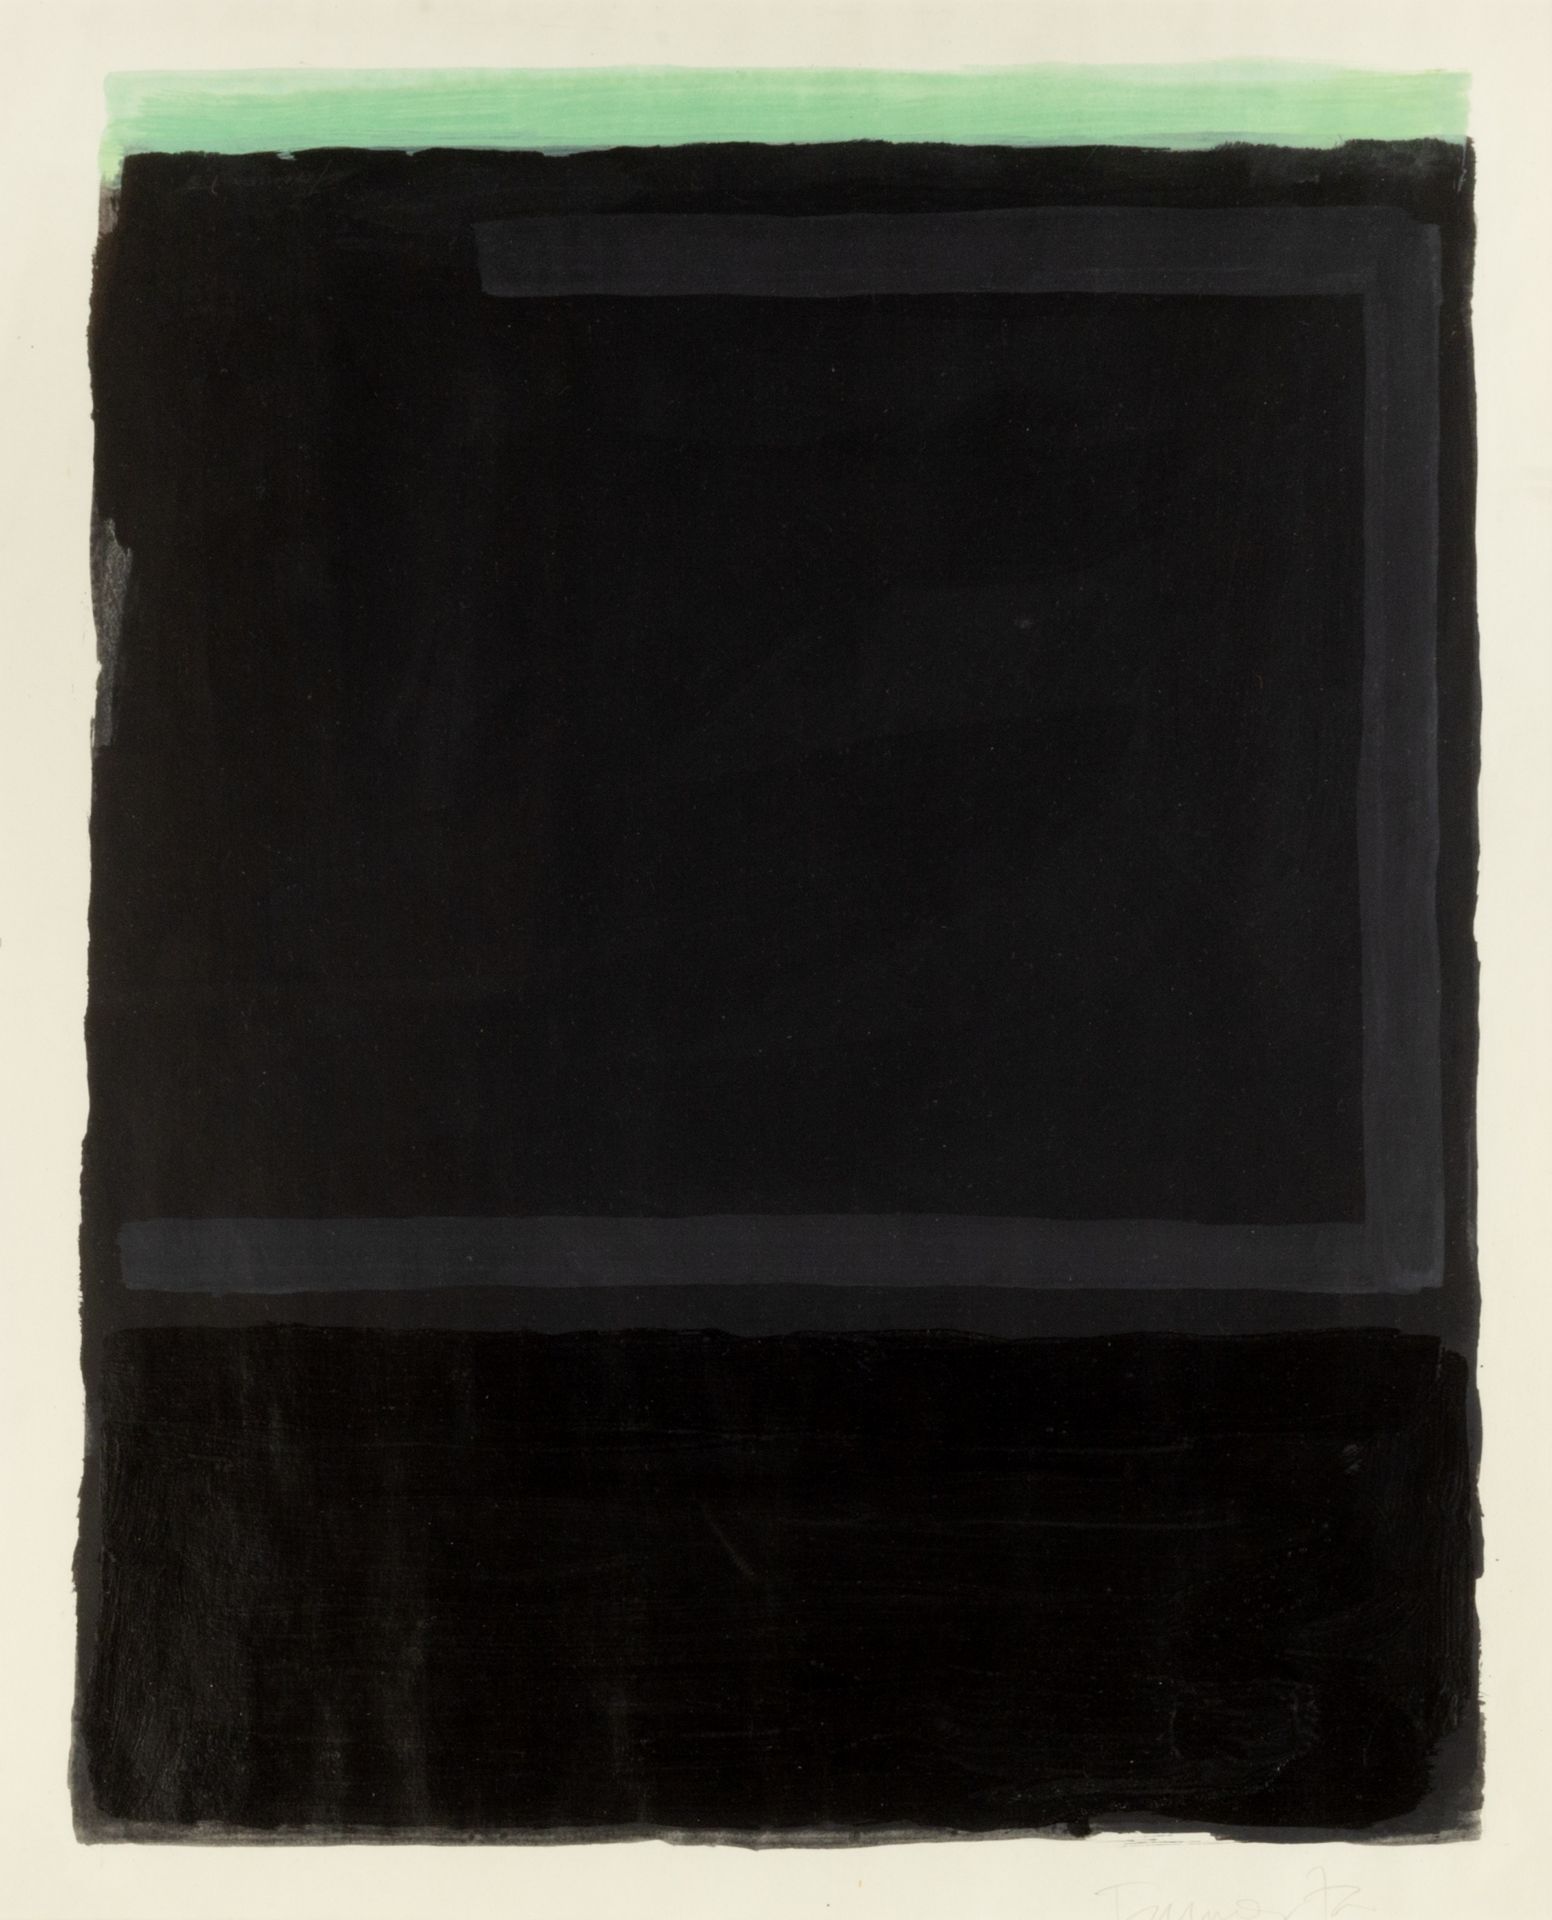 Bernard Farmer (1919-2002) Homage to Mark Rothko, 1975 signed and dated in pencil (lower right)